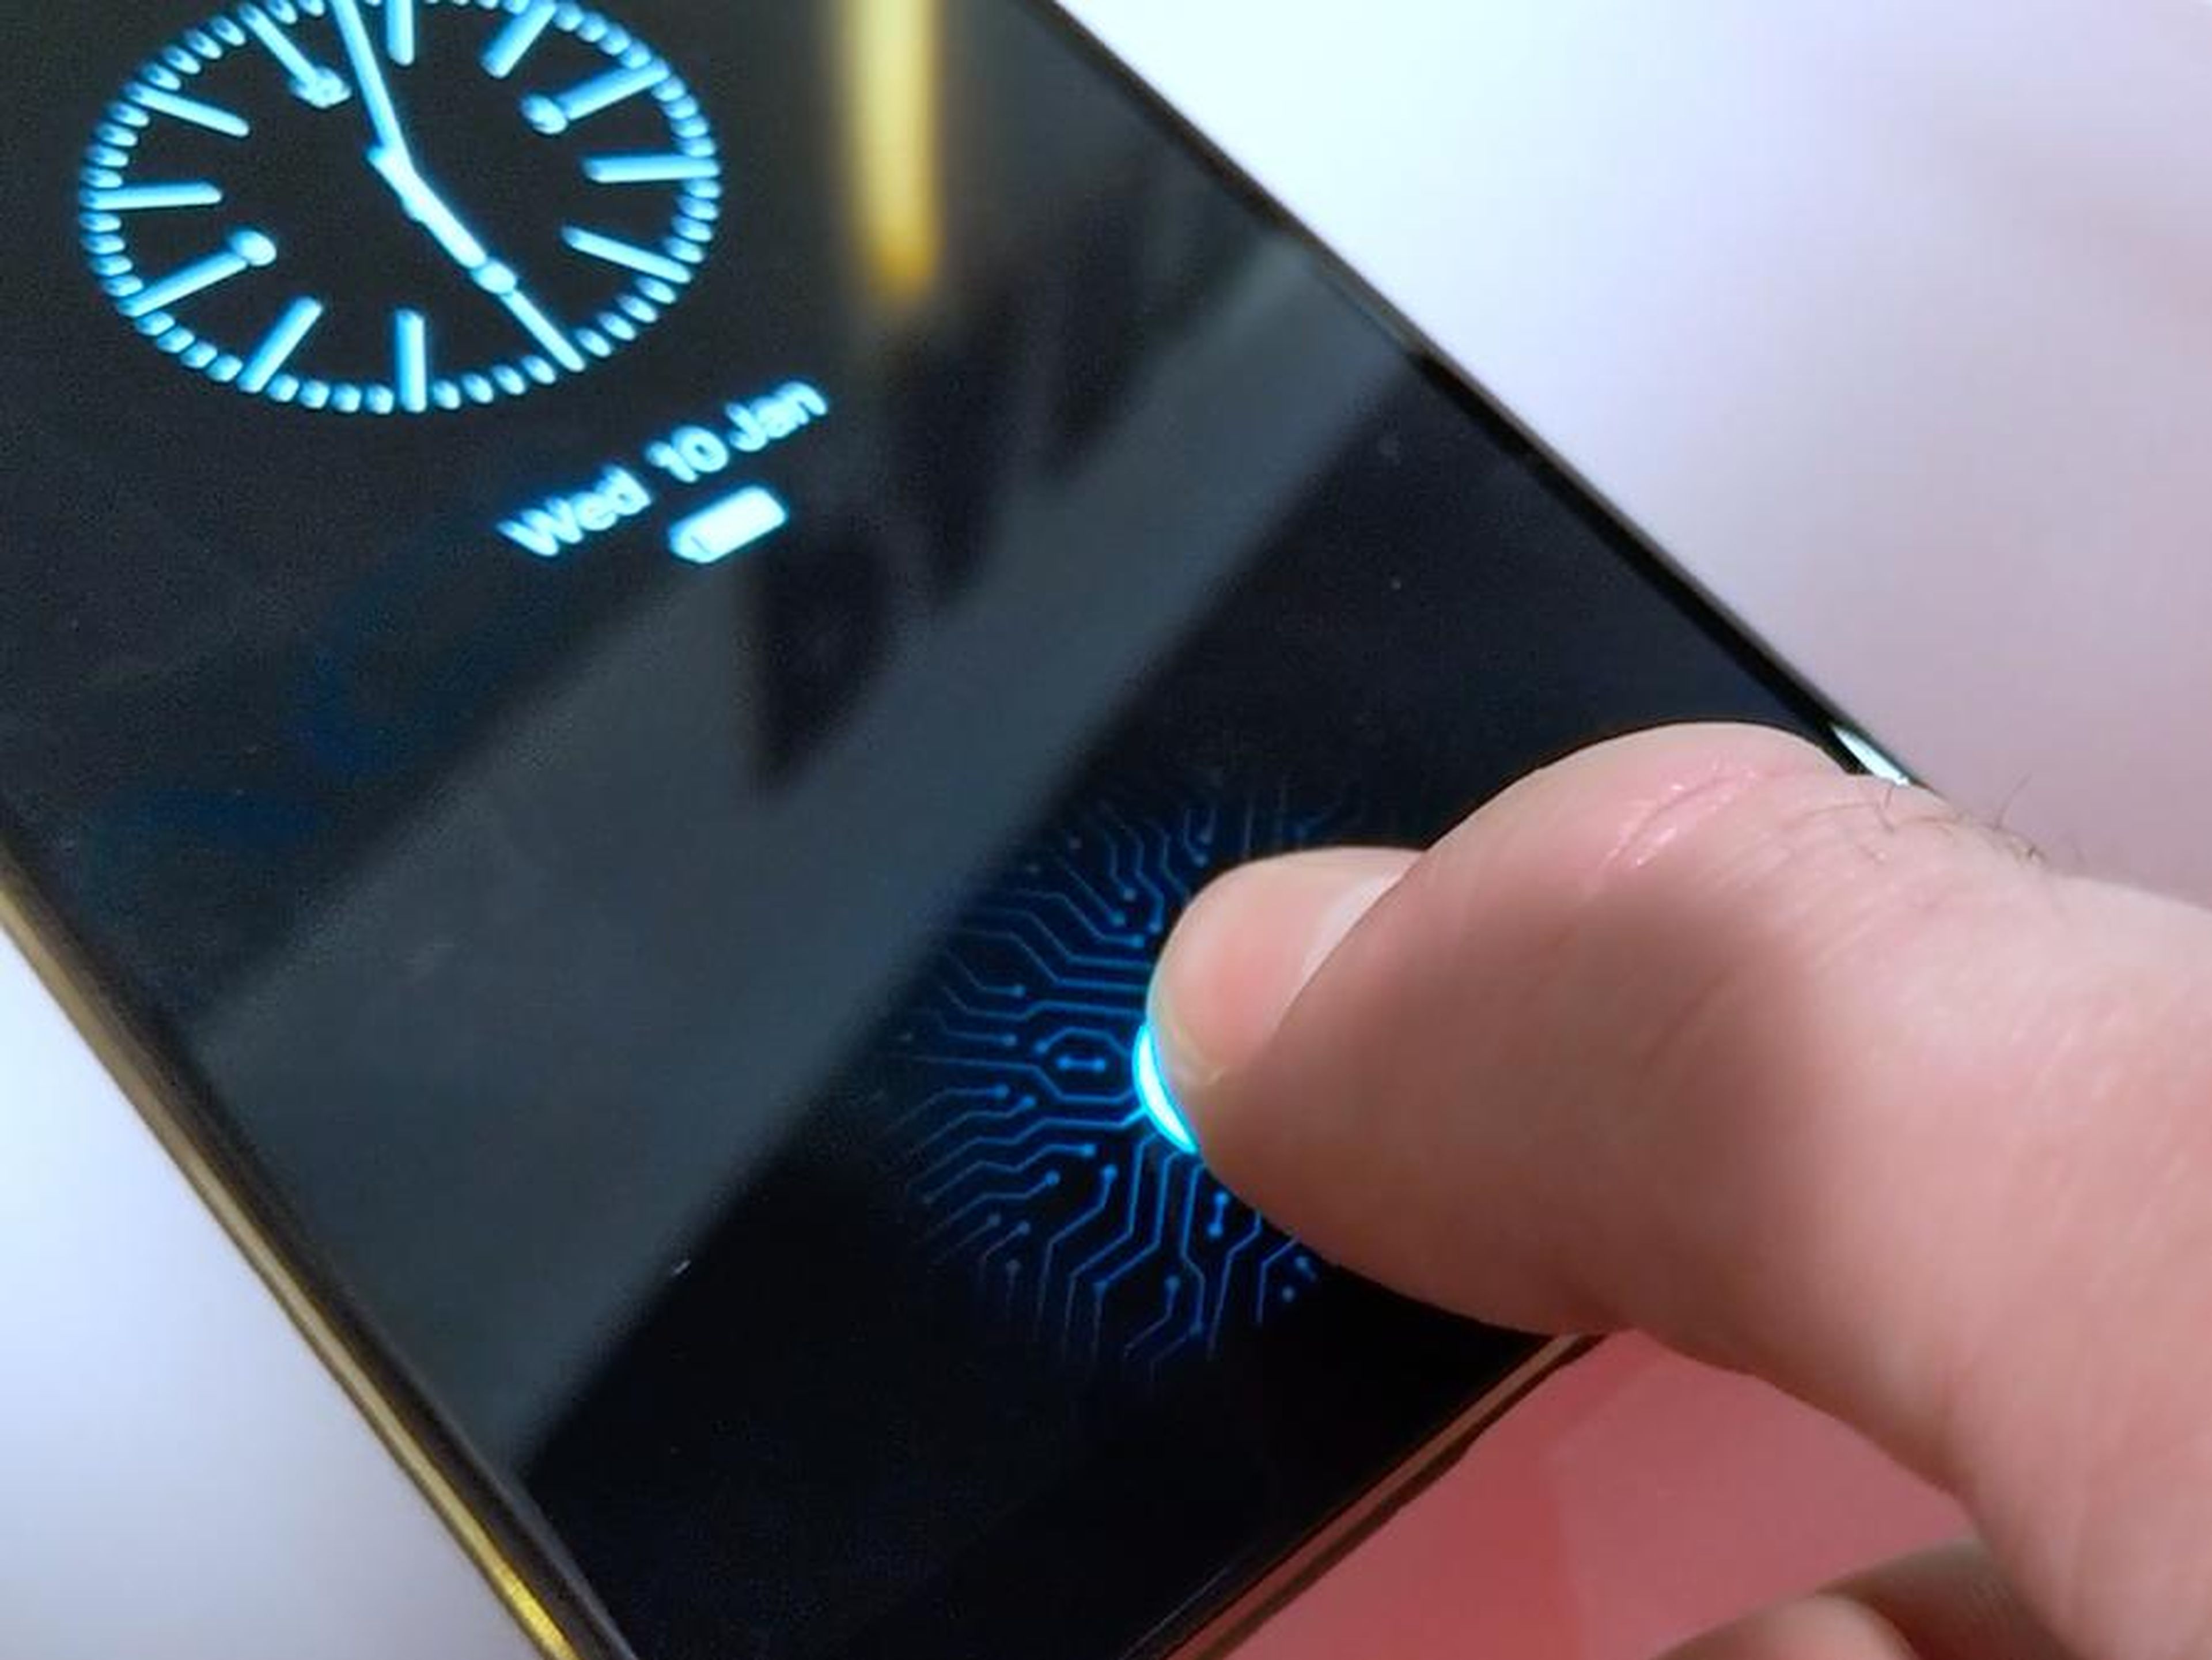 Rumors are suggesting that the Galaxy S10 will have a front-facing fingerprint scanner underneath the display.